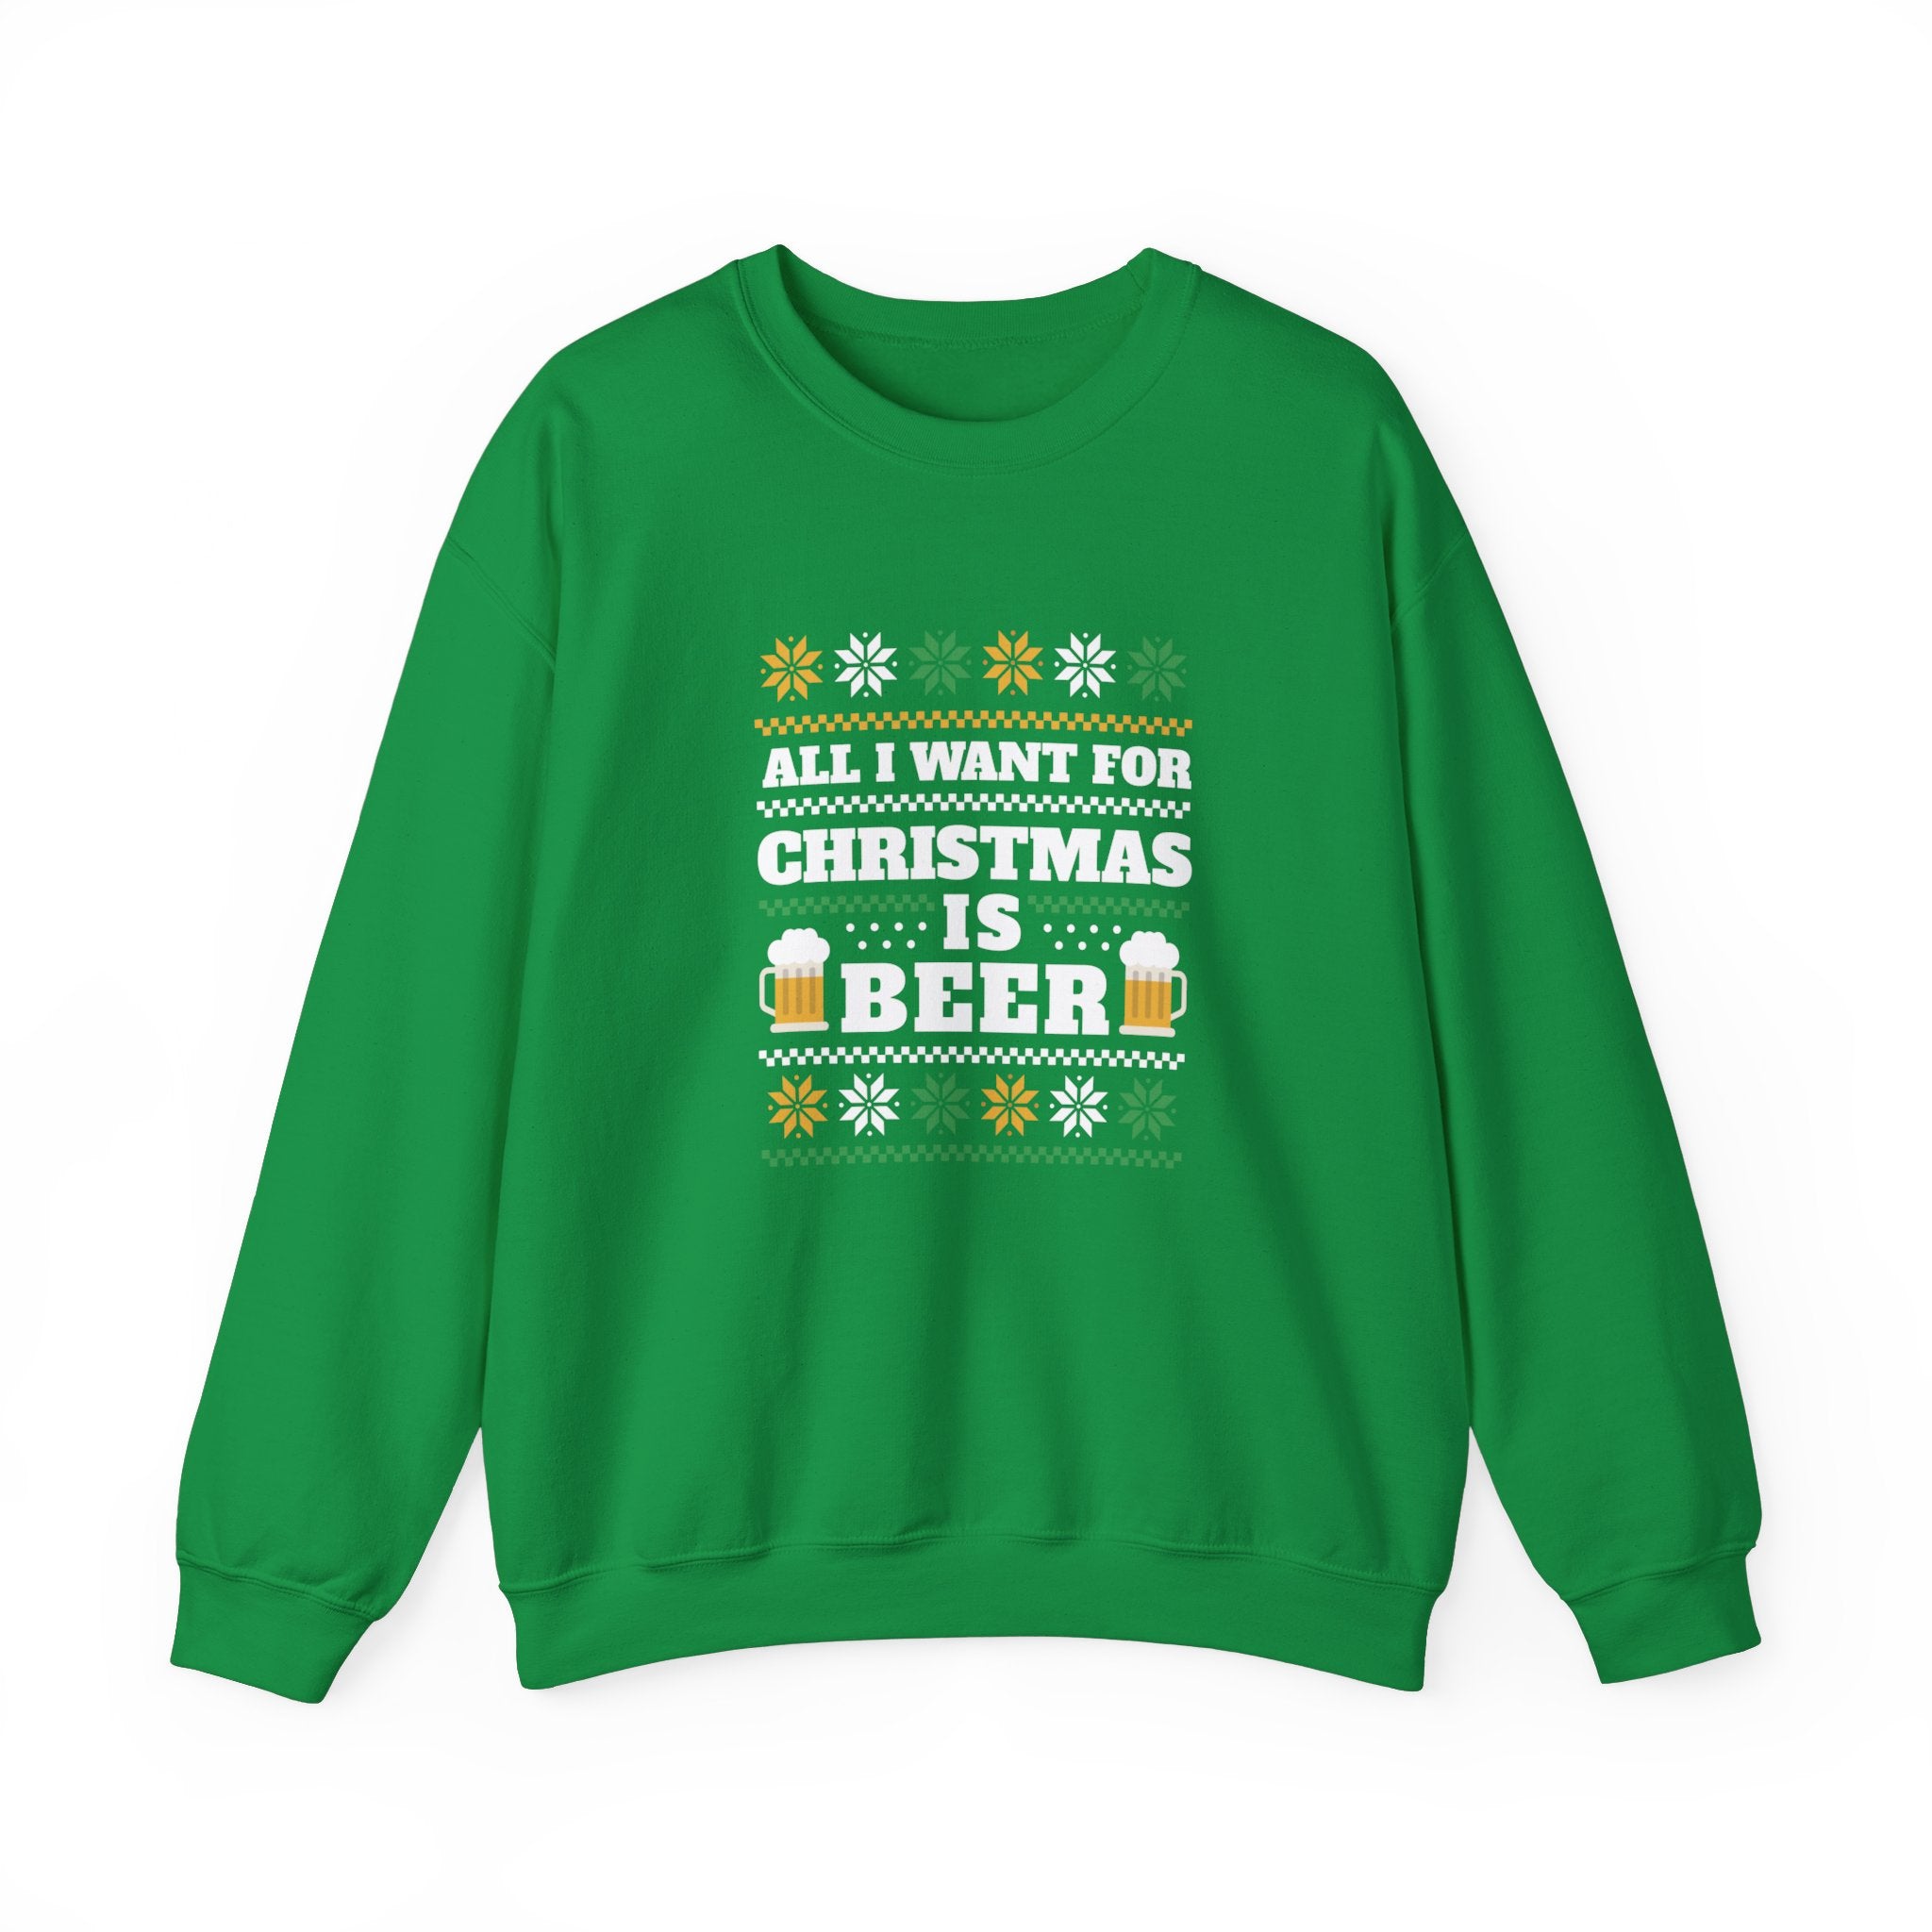 Green sweatshirt with festive design, featuring the text "ALL I WANT FOR CHRISTMAS IS BEER" and images of beer mugs and snowflakes. Perfect for colder months, this Beer Ugly Sweater - Sweatshirt is a fun addition to your holiday wardrobe.